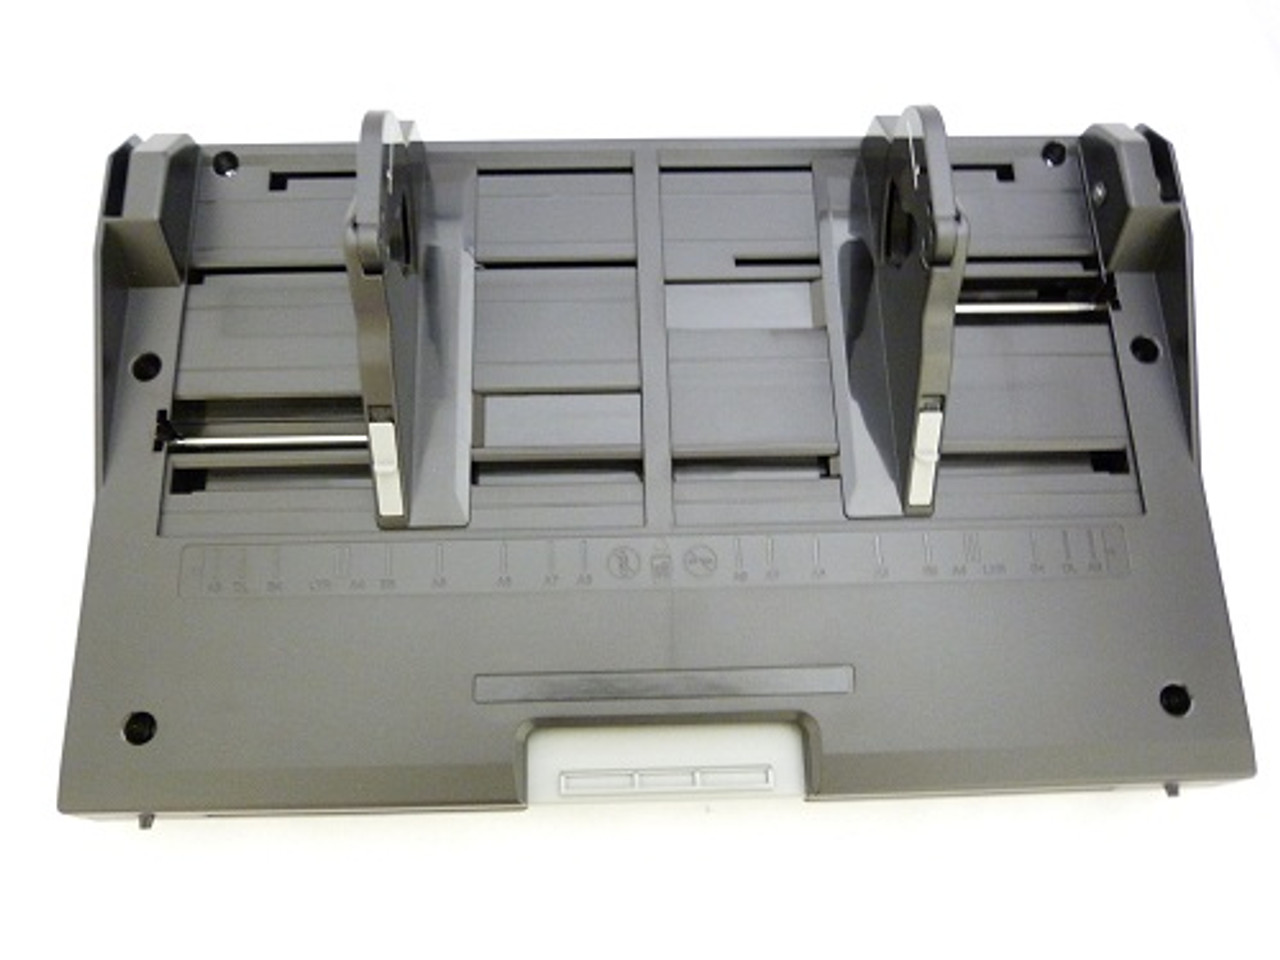 Replacement Hopper-Unit-EH for fi-5950